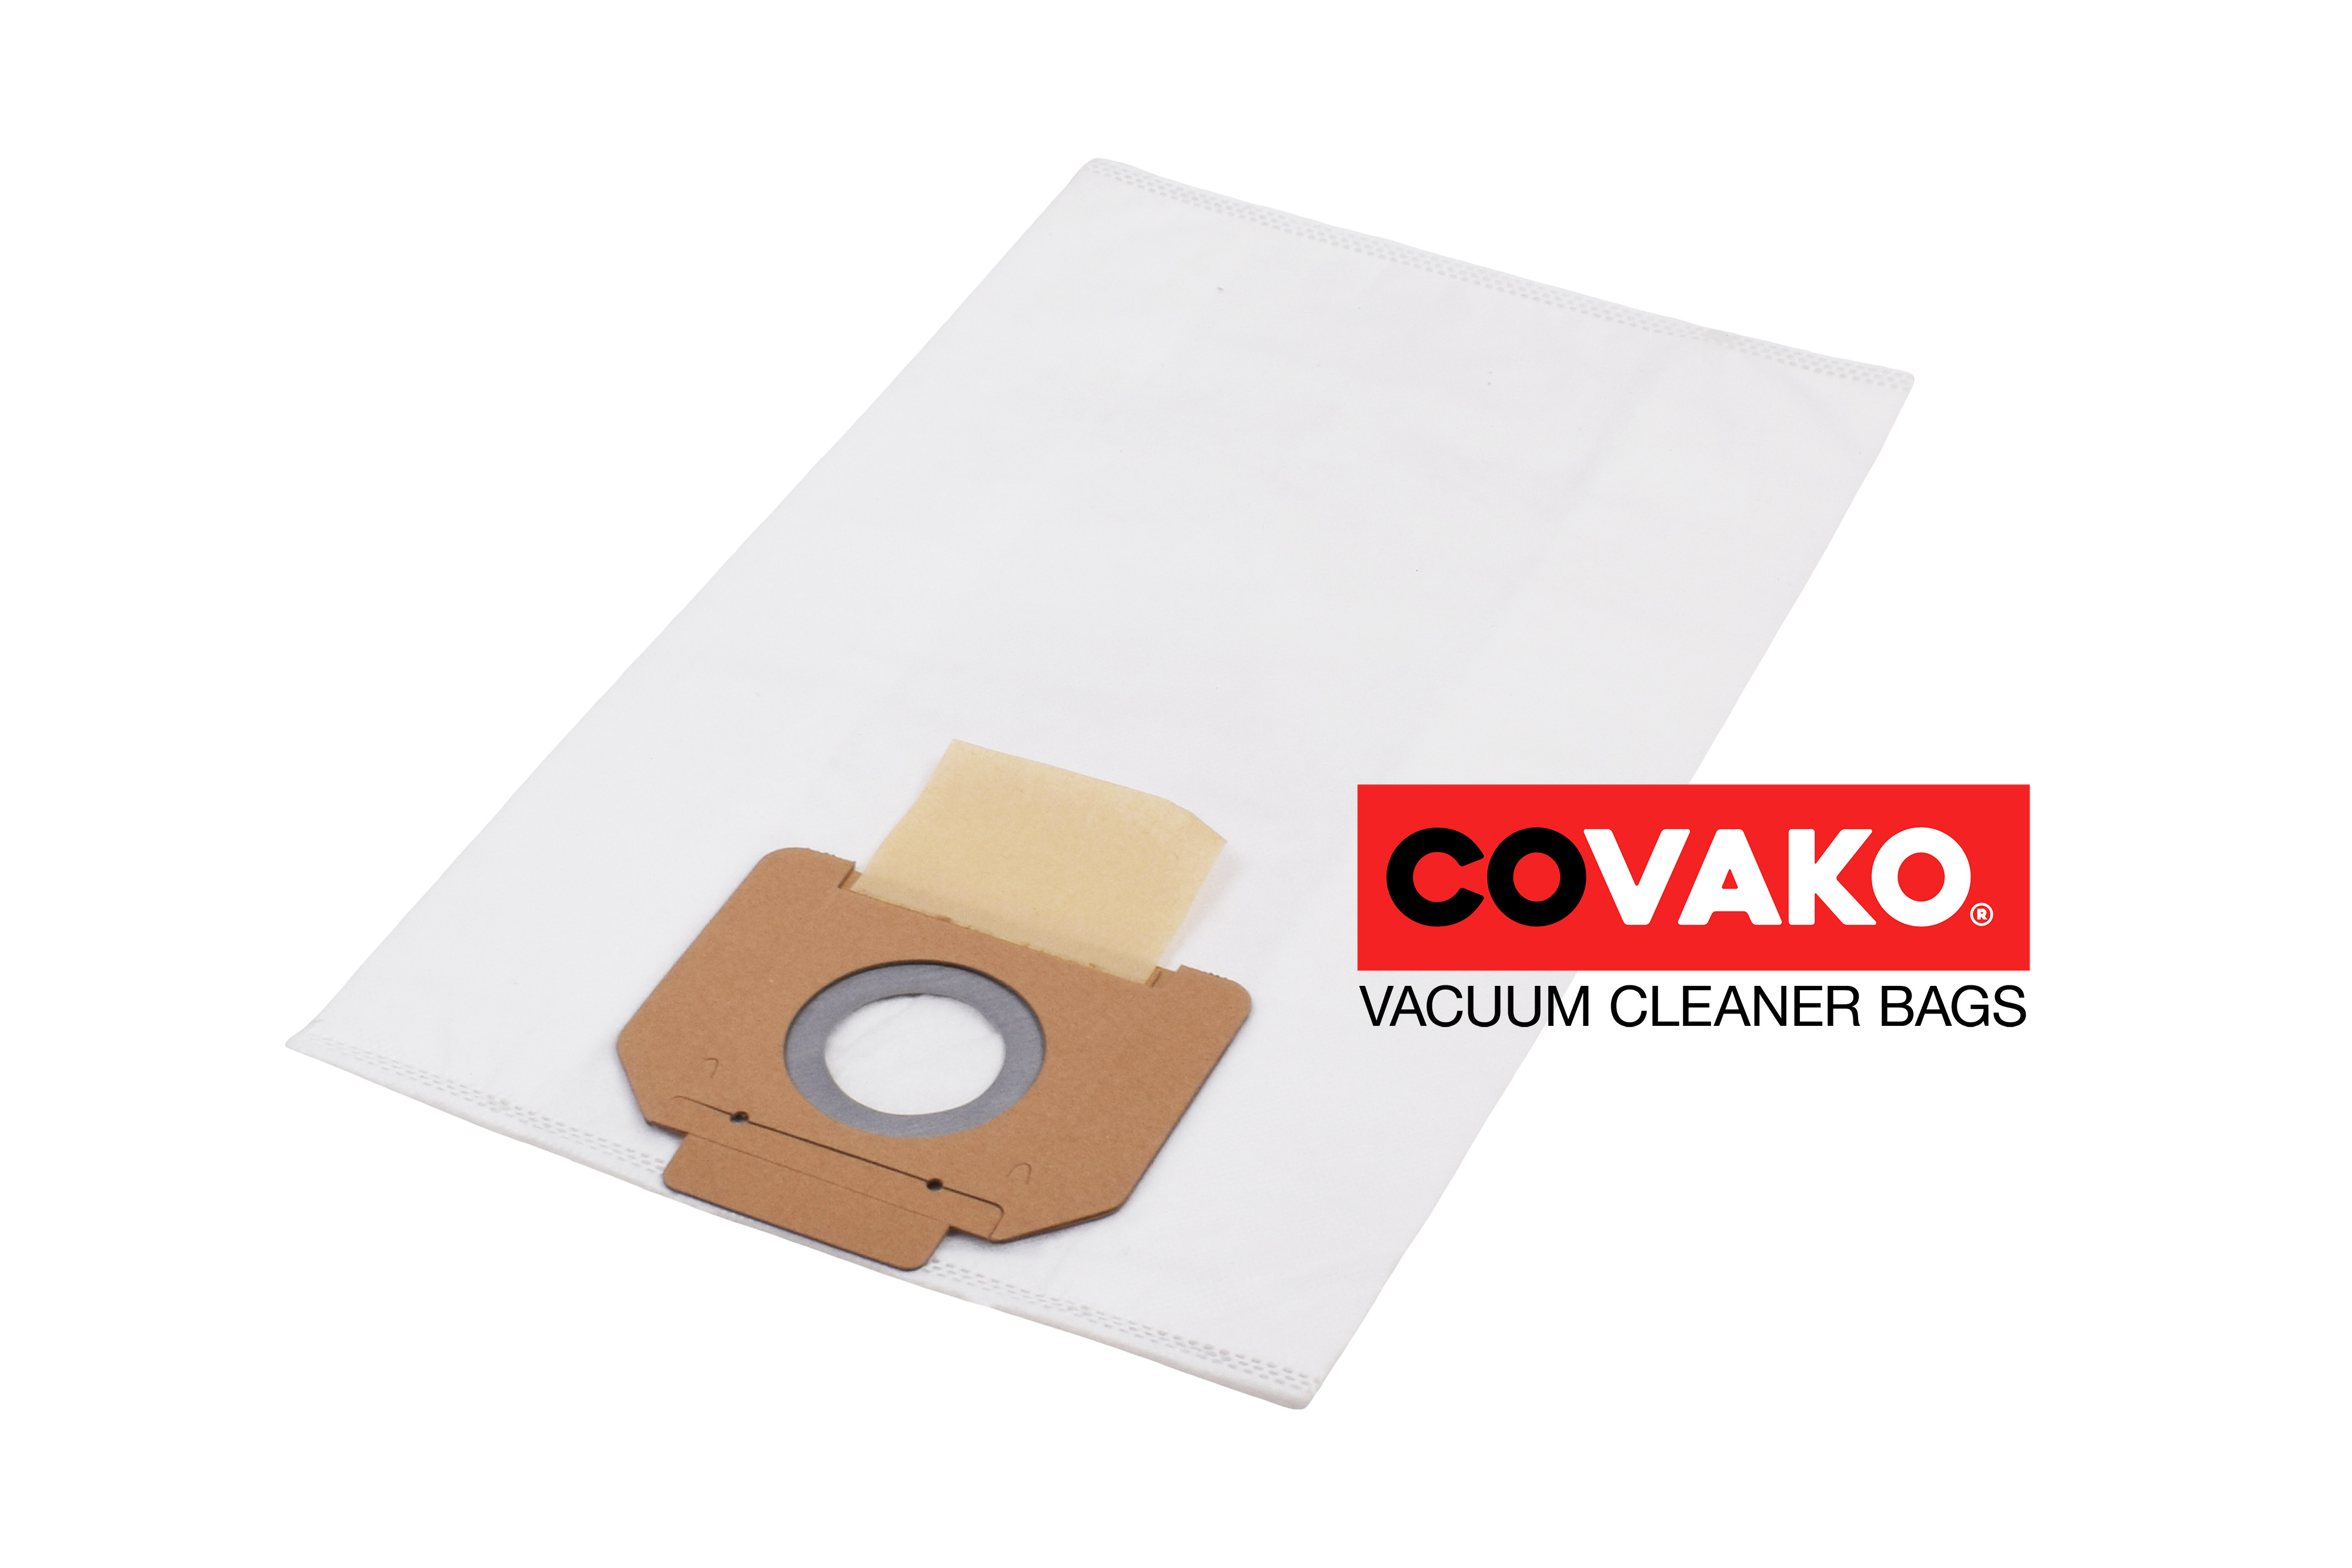 IPC YP 1/13 ECO B / Synthesis - IPC vacuum cleaner bags